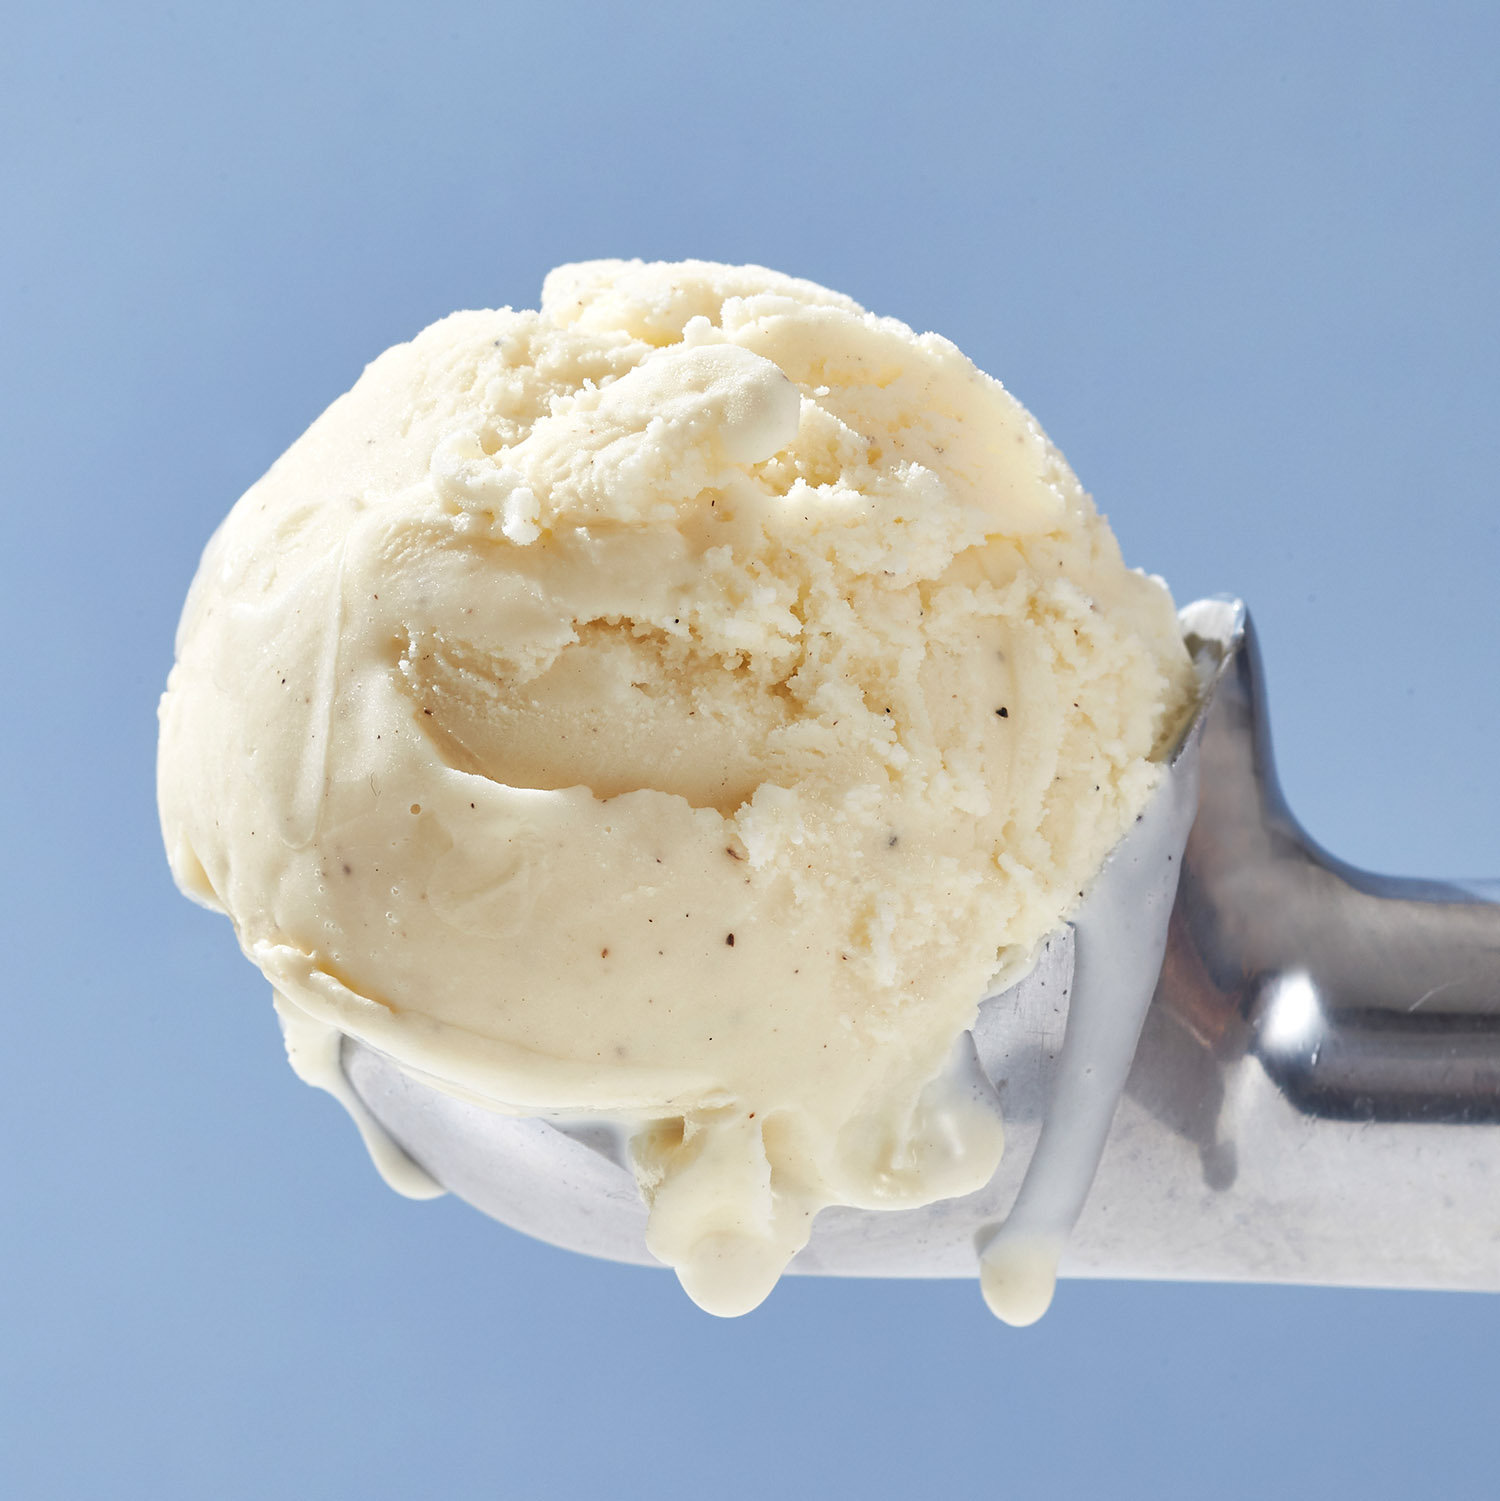 This Luxury Ice Cream Scoop Easily Cuts Through The Most Frozen Pints